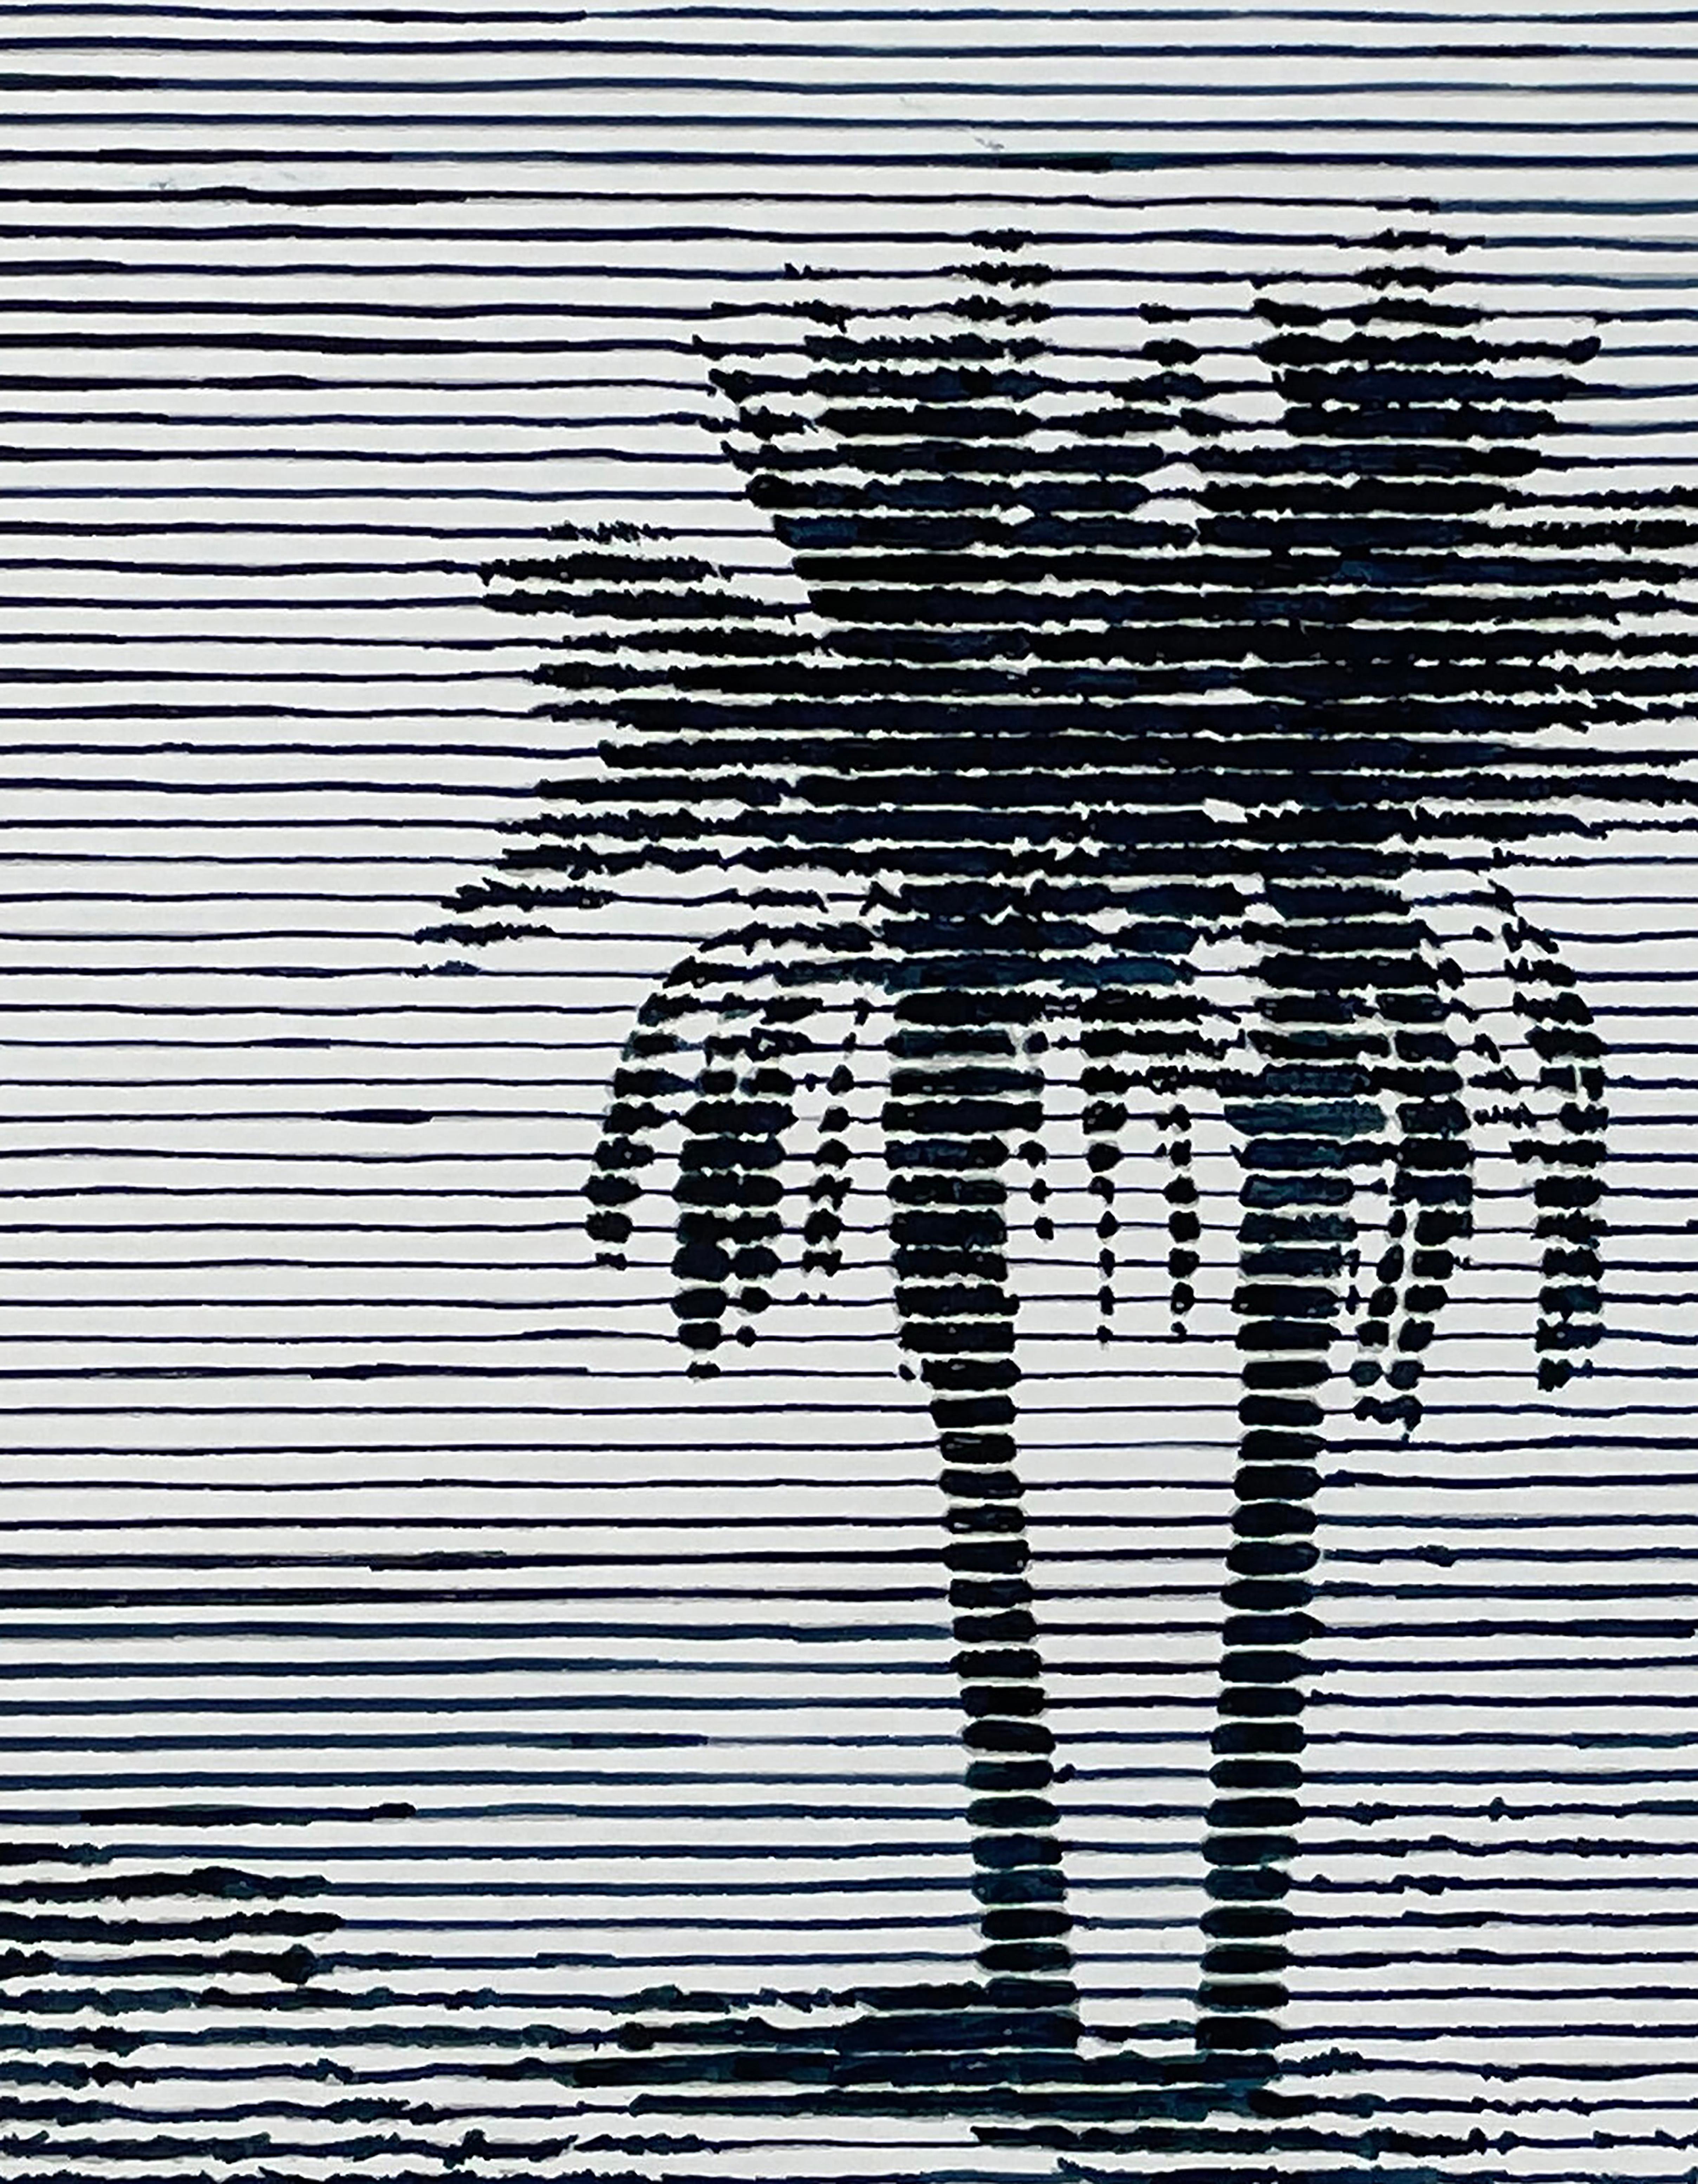 Mirage/Oasis, black and white painting of a beach with palm trees - Painting by Charles Buckley